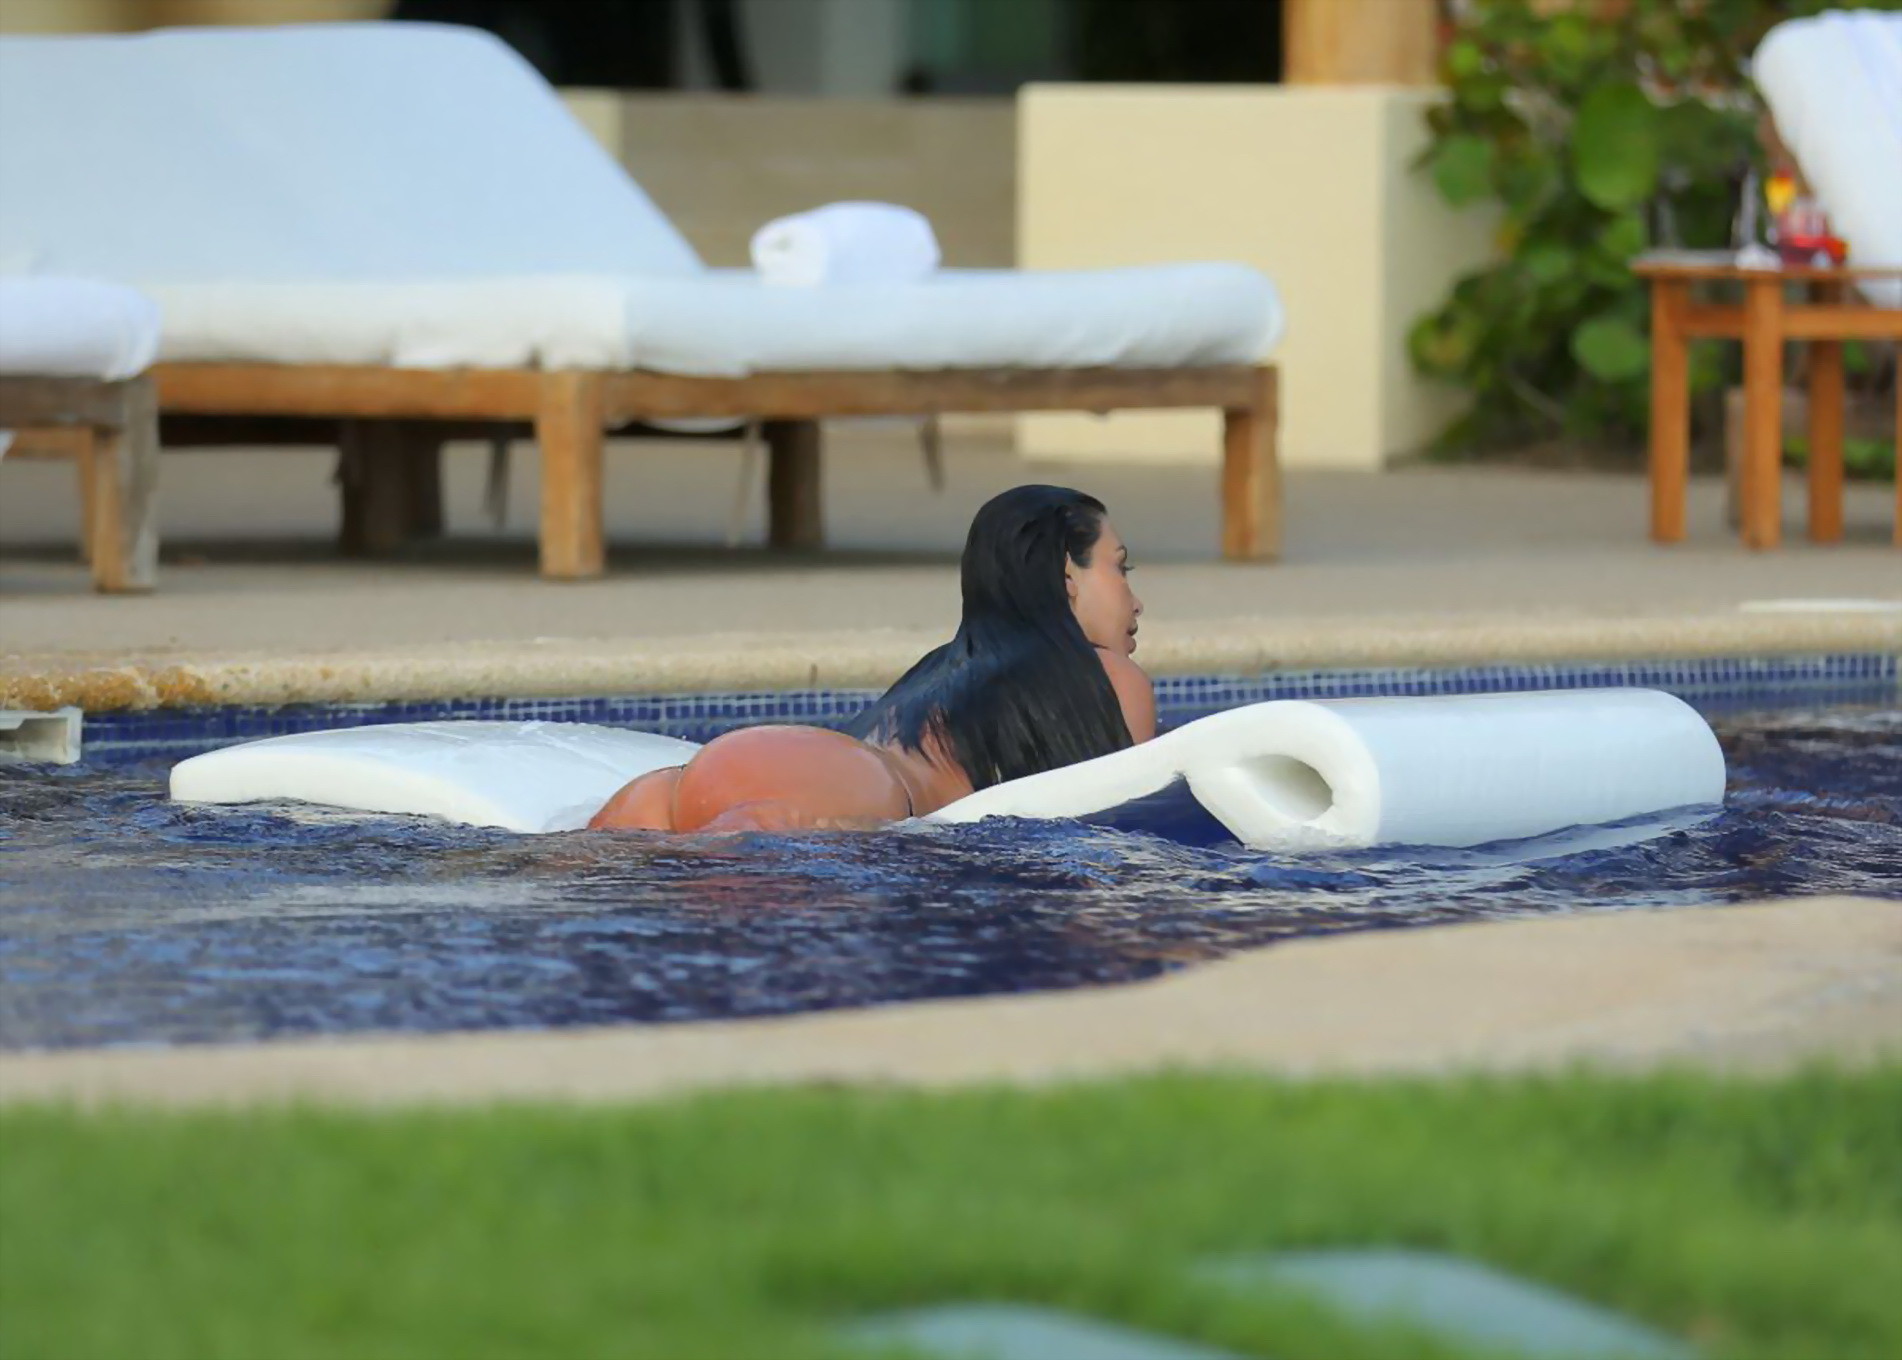 Kim Kardashian shows off her huge boobs in a wet seethru top poolside in Mexico #75193614